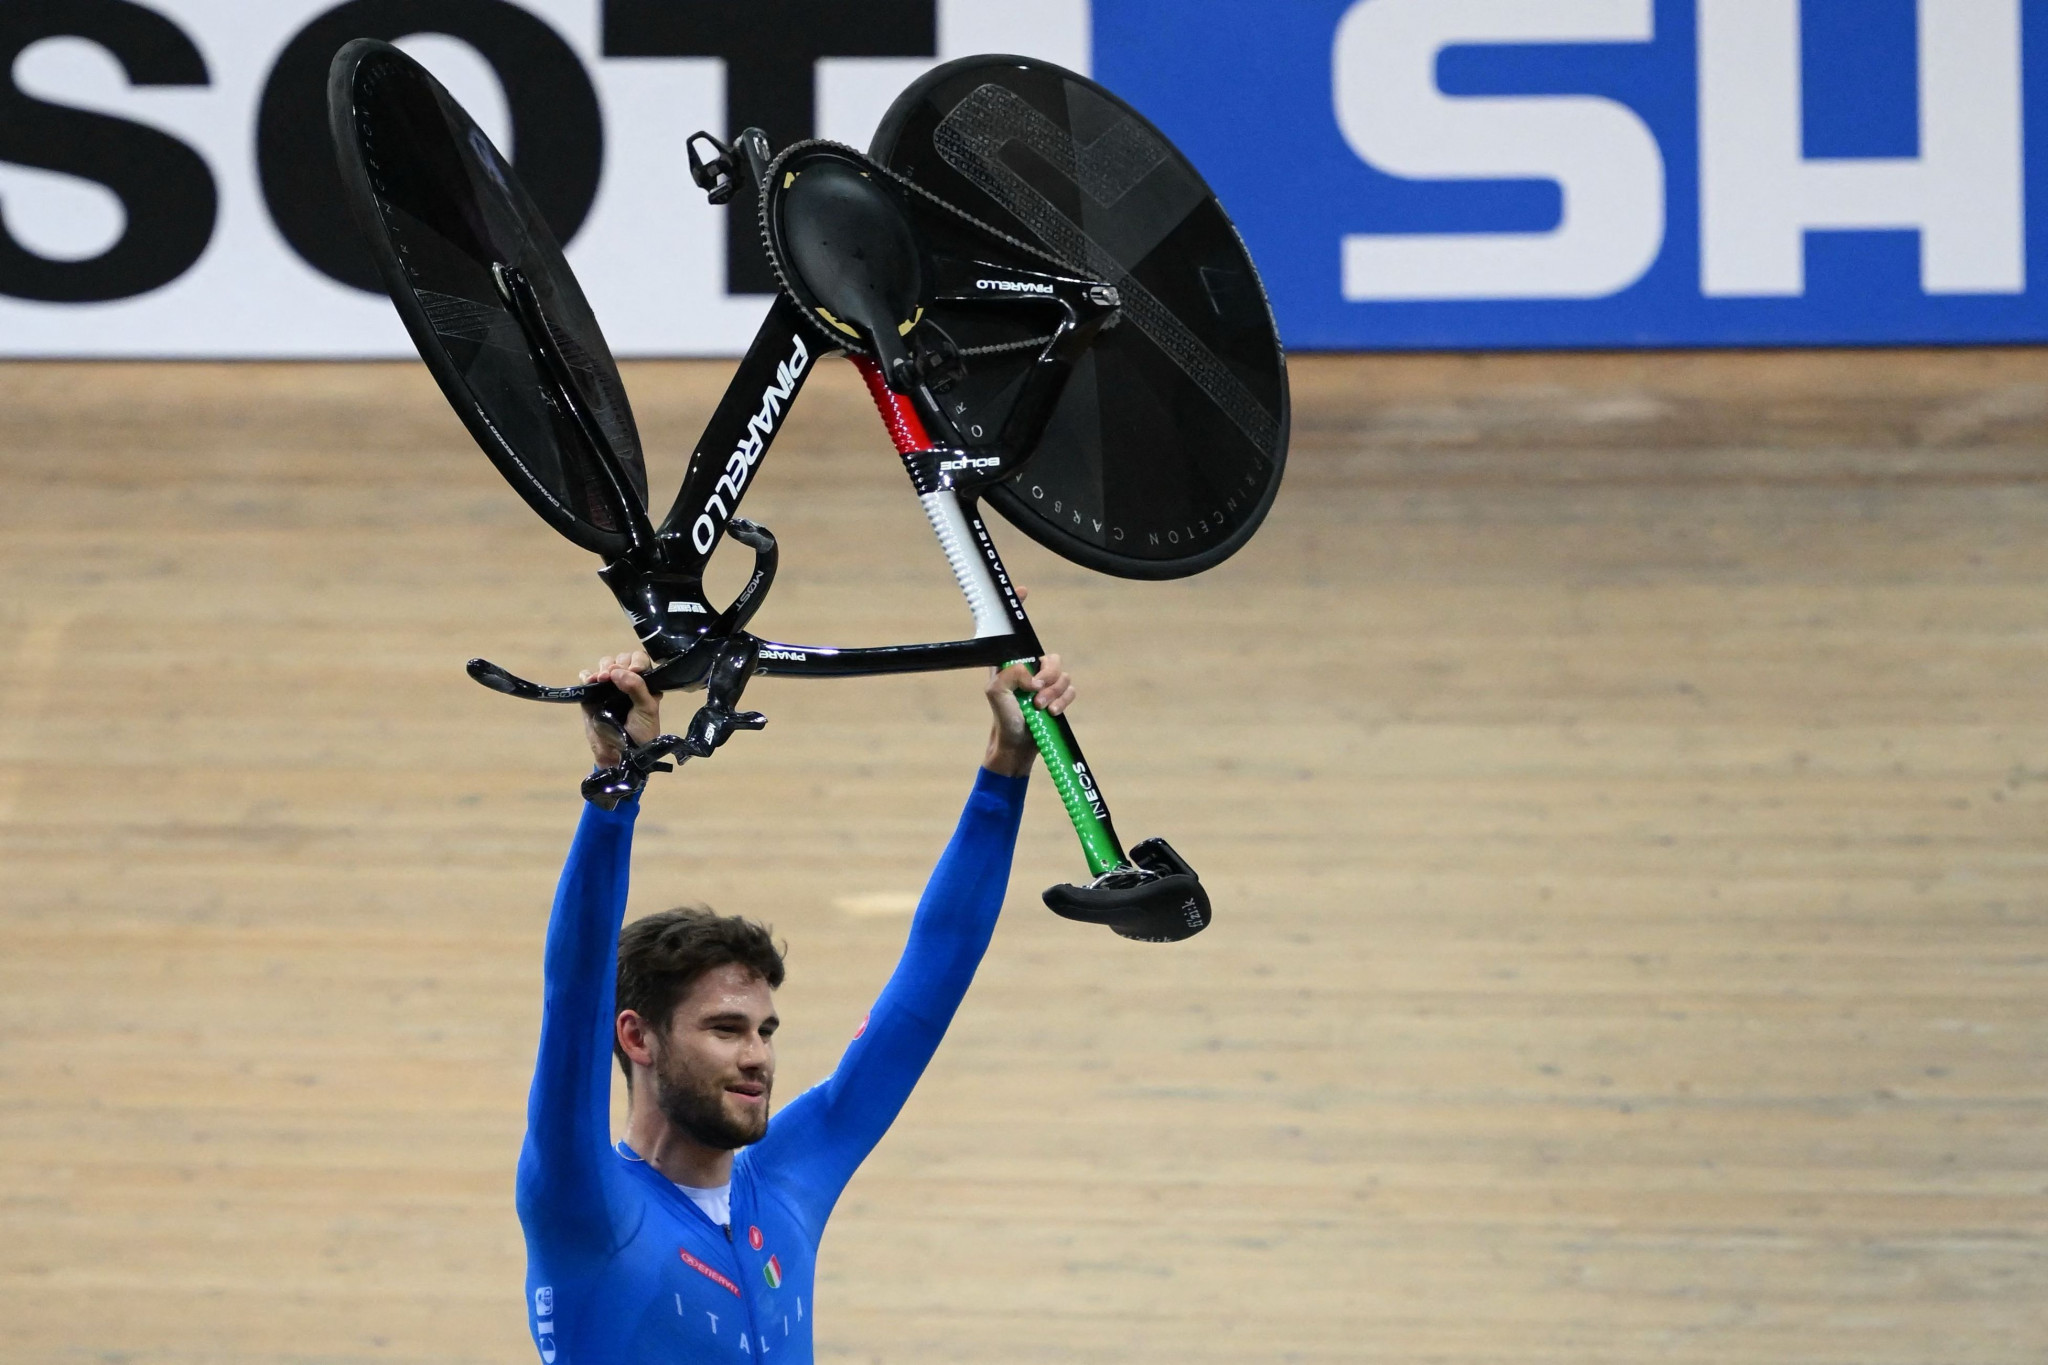 Filippo Ganna lifts his bike in triumph after setting a world record in winning the men's individual pursuit ©Getty Images